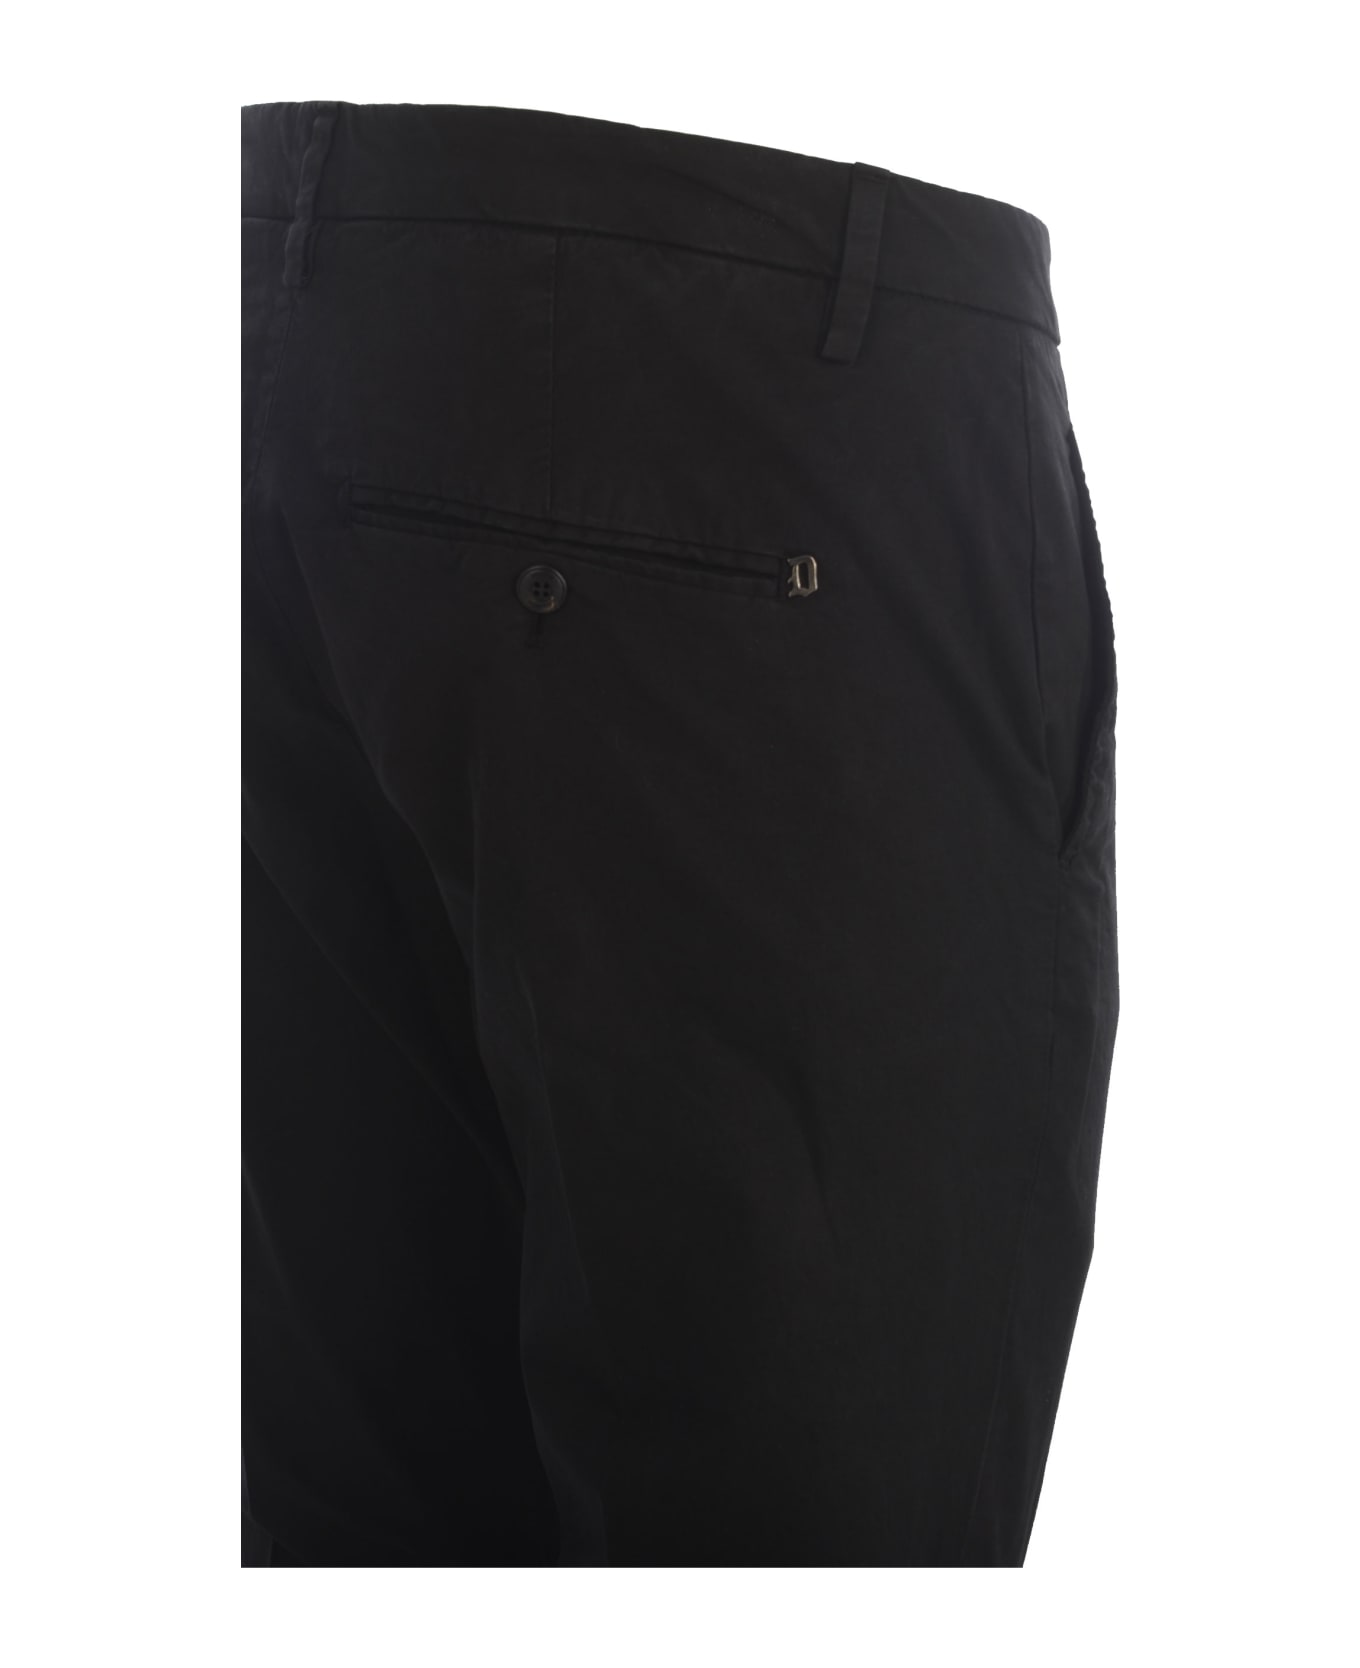 Dondup Concealed Skinny Trousers - Black ボトムス